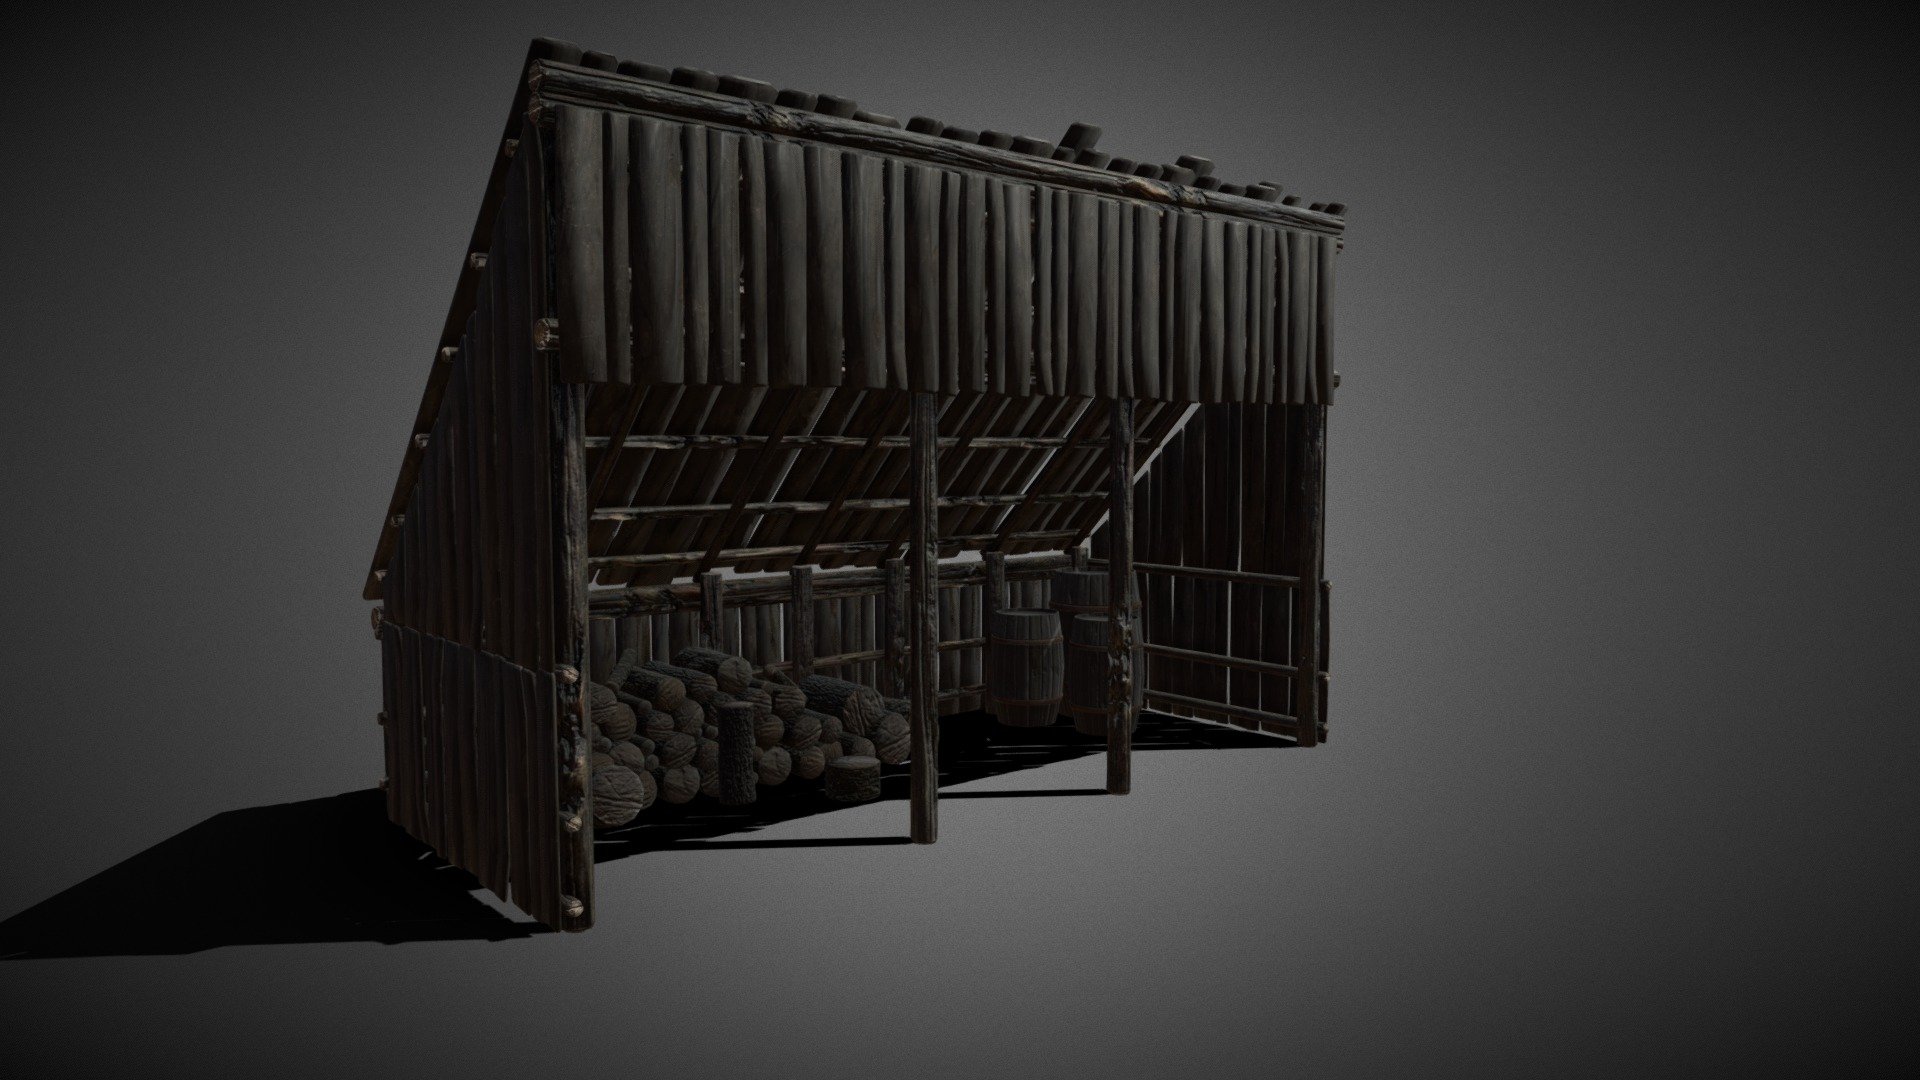 The wood storage is divided into 3 parts. Warehouse, woodpile and barrels. All are individually exportable. Materials and textures are included. The lumber store has been optimized for games and offers few faces as well as only 3 materials - Low Poly Woodenstorage - 3D model by 3DFoxHound 3d model